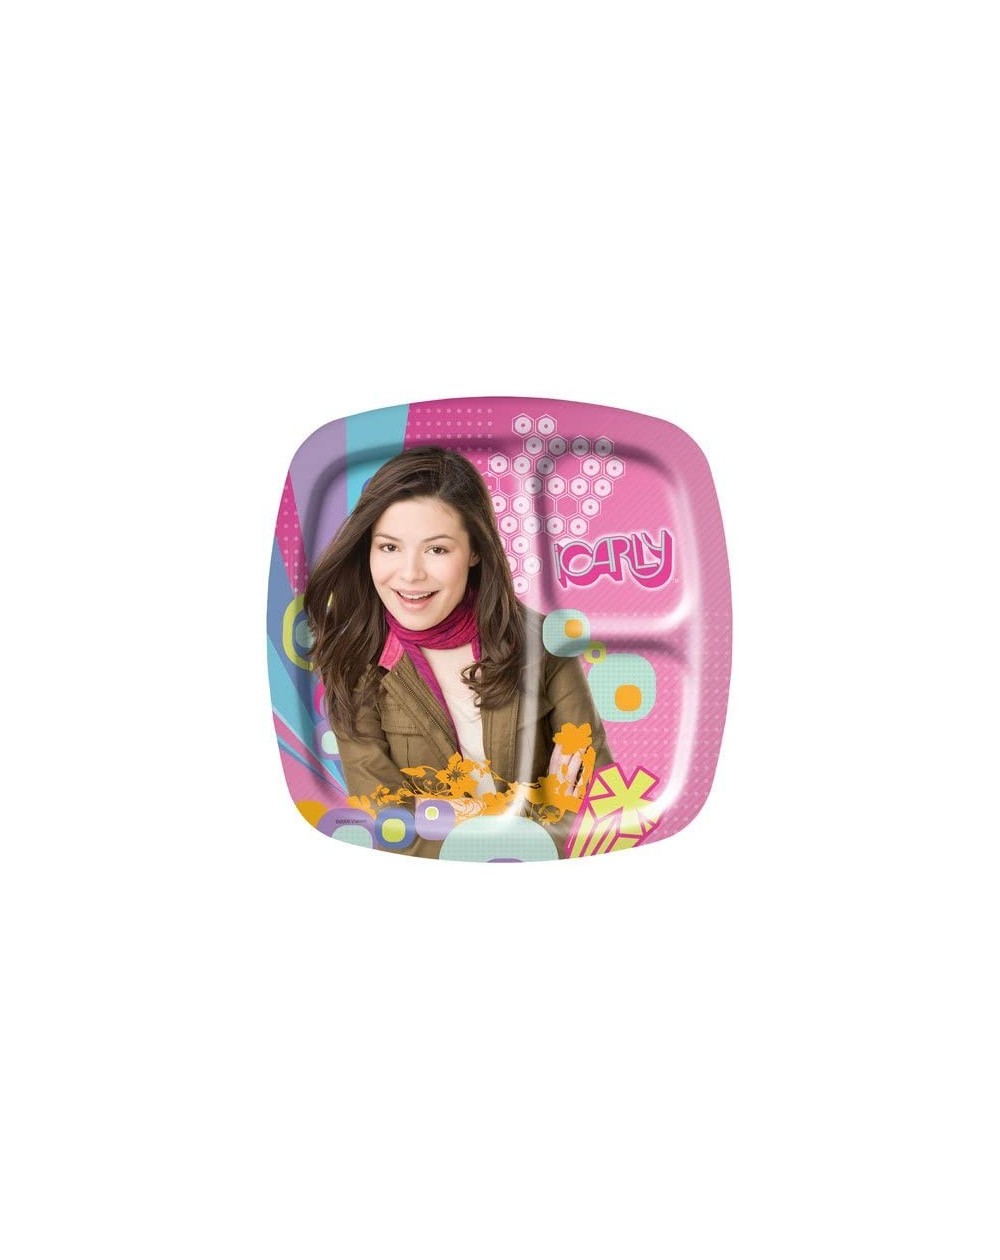 Party Tableware iCarly Lunch Plates 8ct - CU1141CKHY9 $8.11